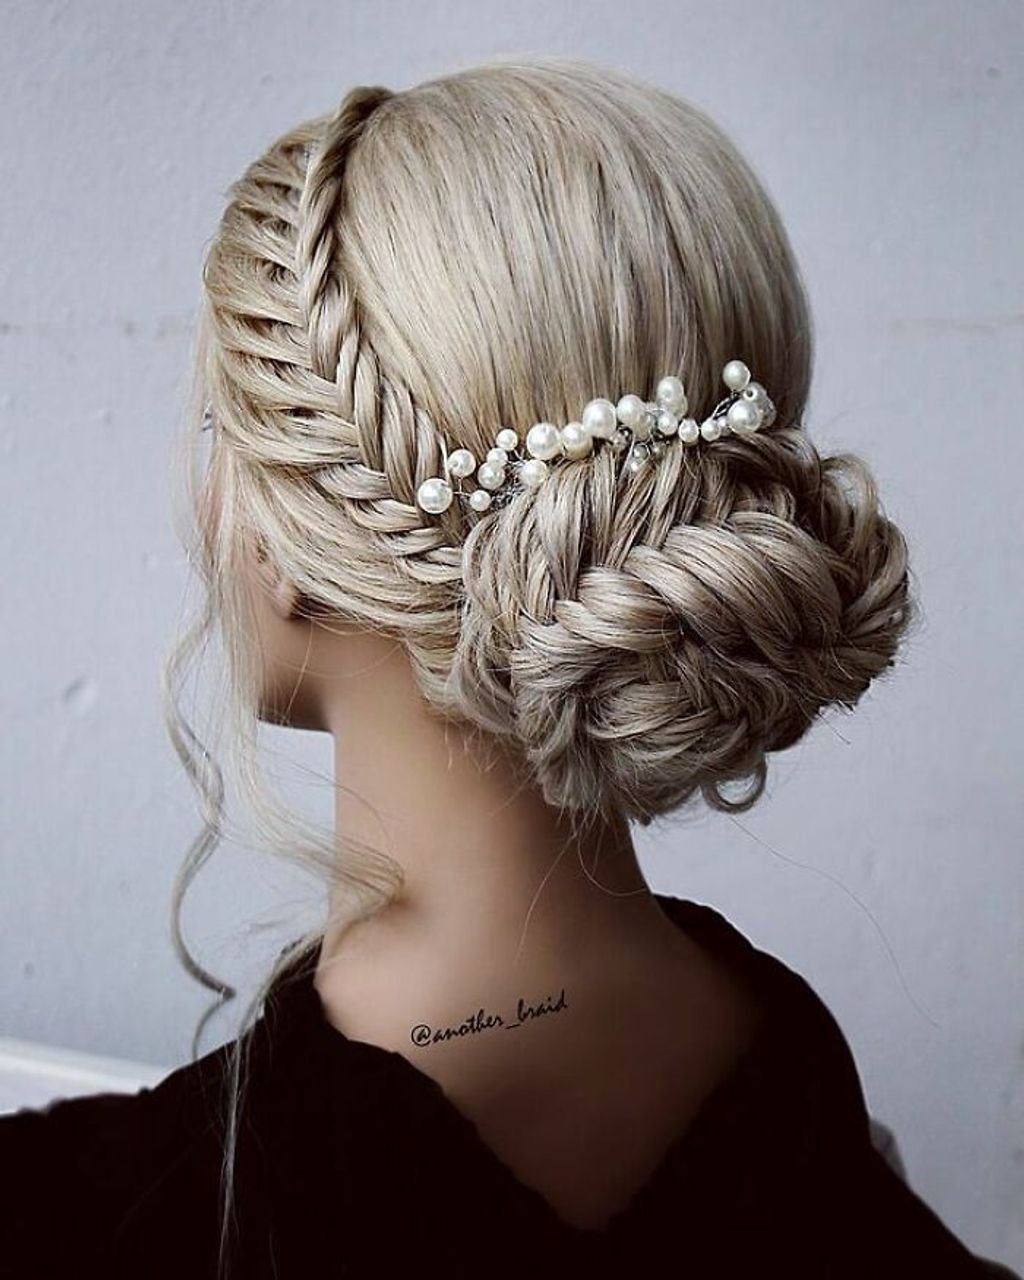 Forrás: Instagram/another_braid